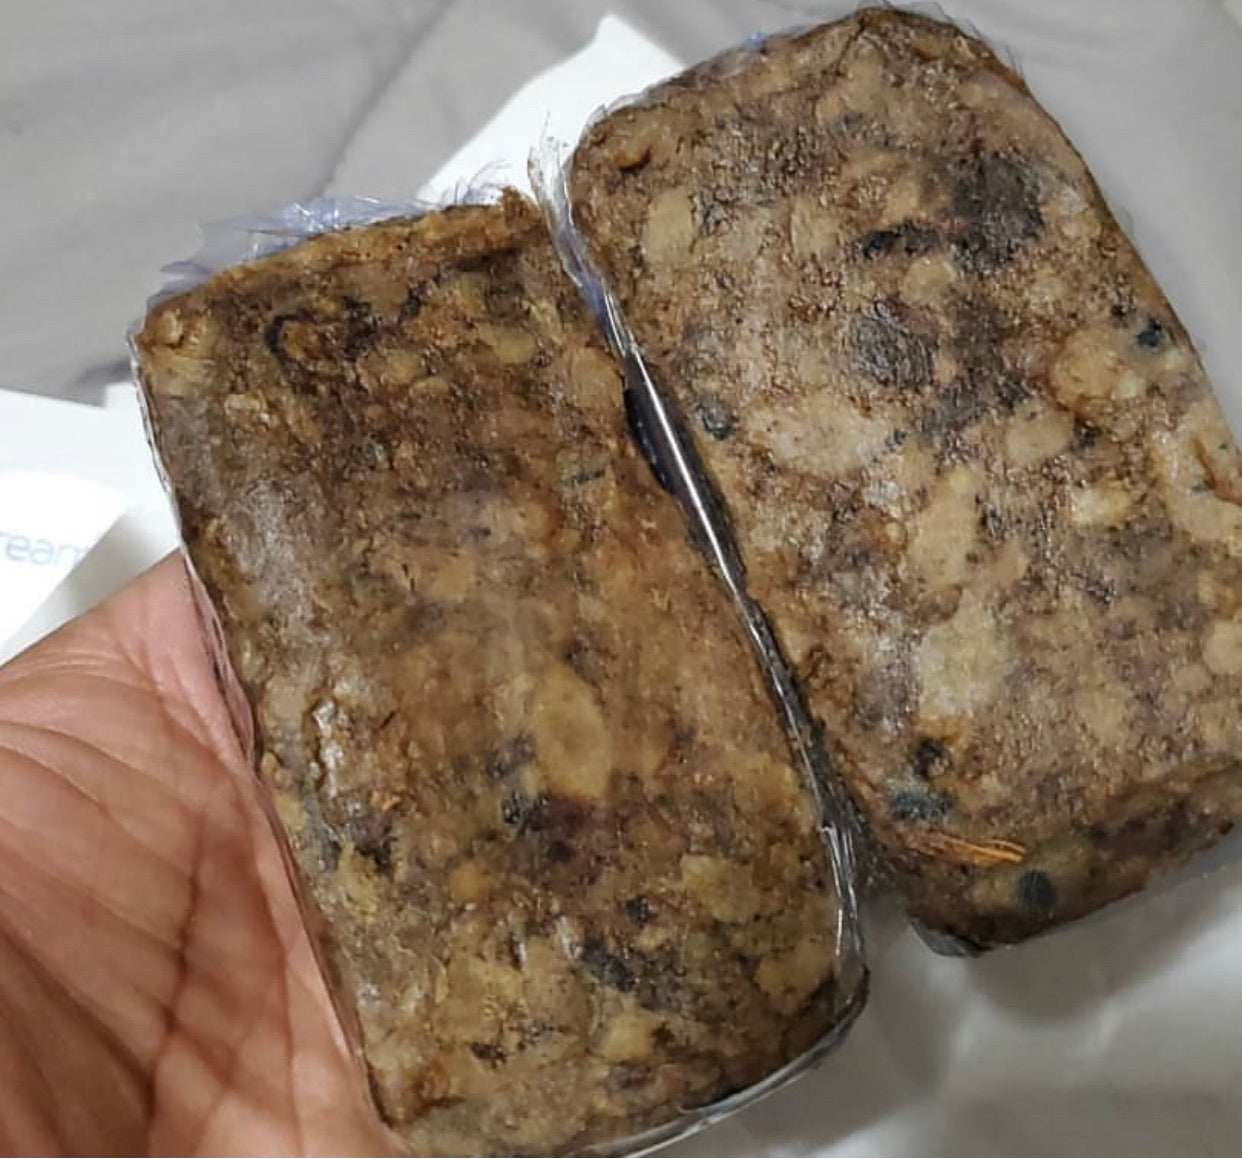 African black soap - omez beauty products 